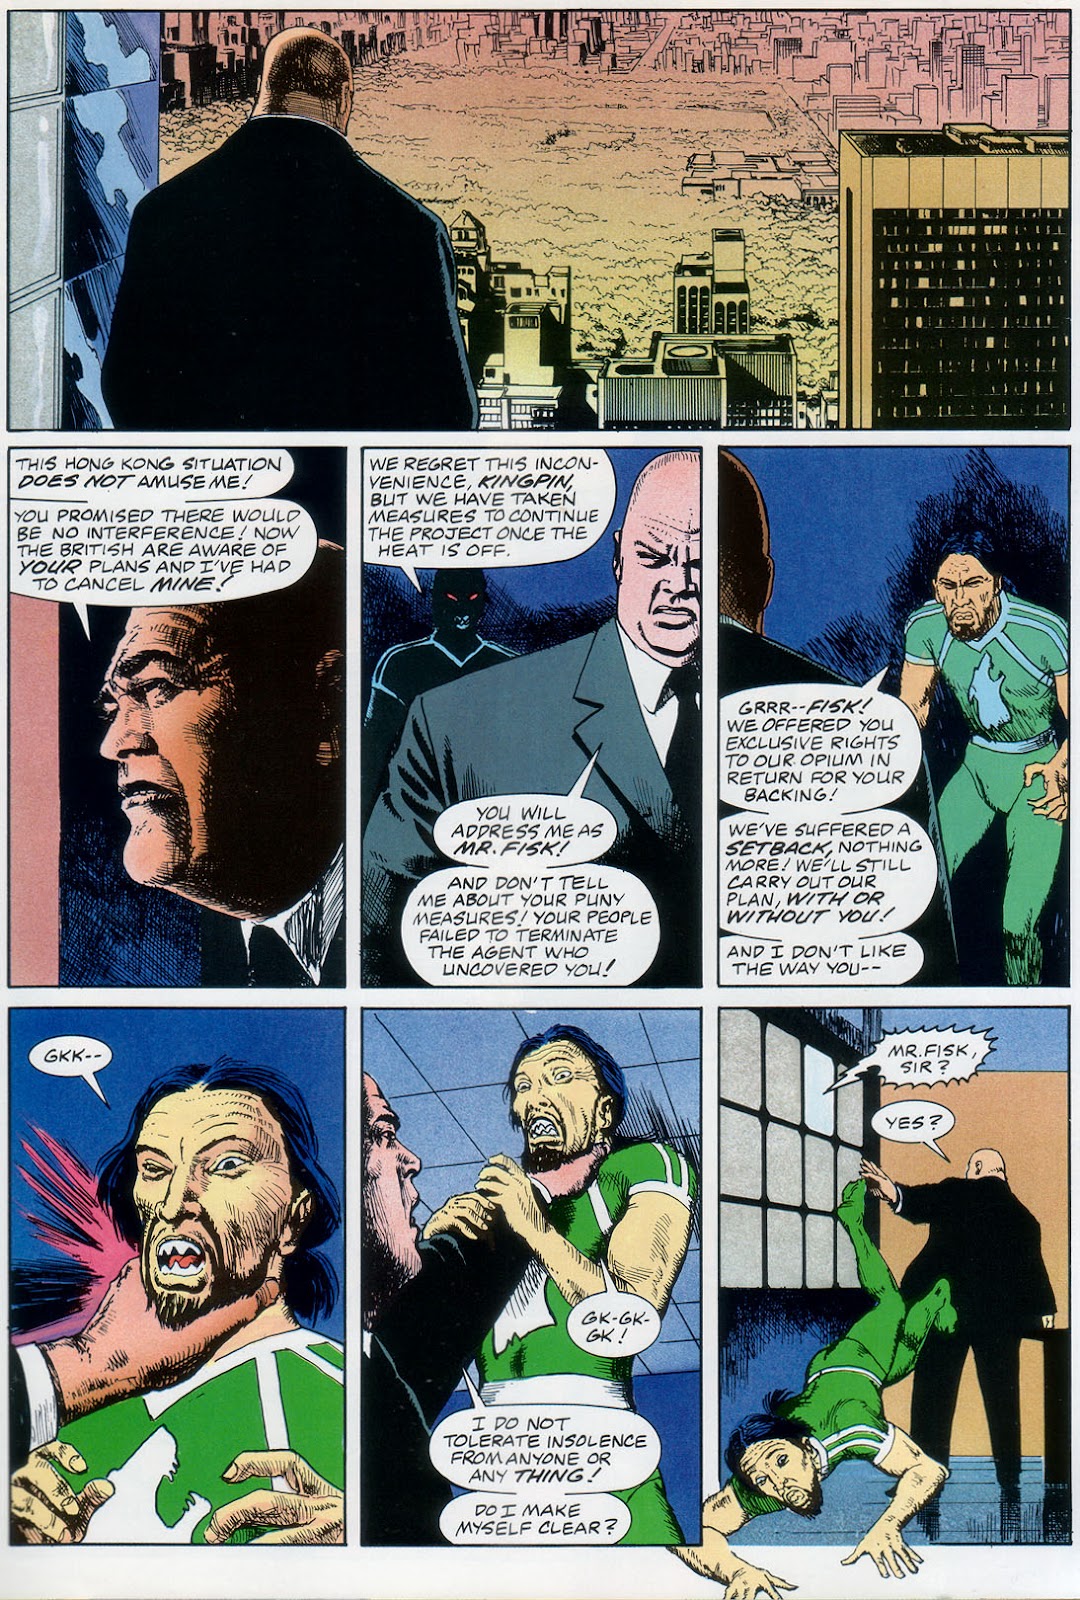 Marvel Graphic Novel issue 57 - Rick Mason - The Agent - Page 29